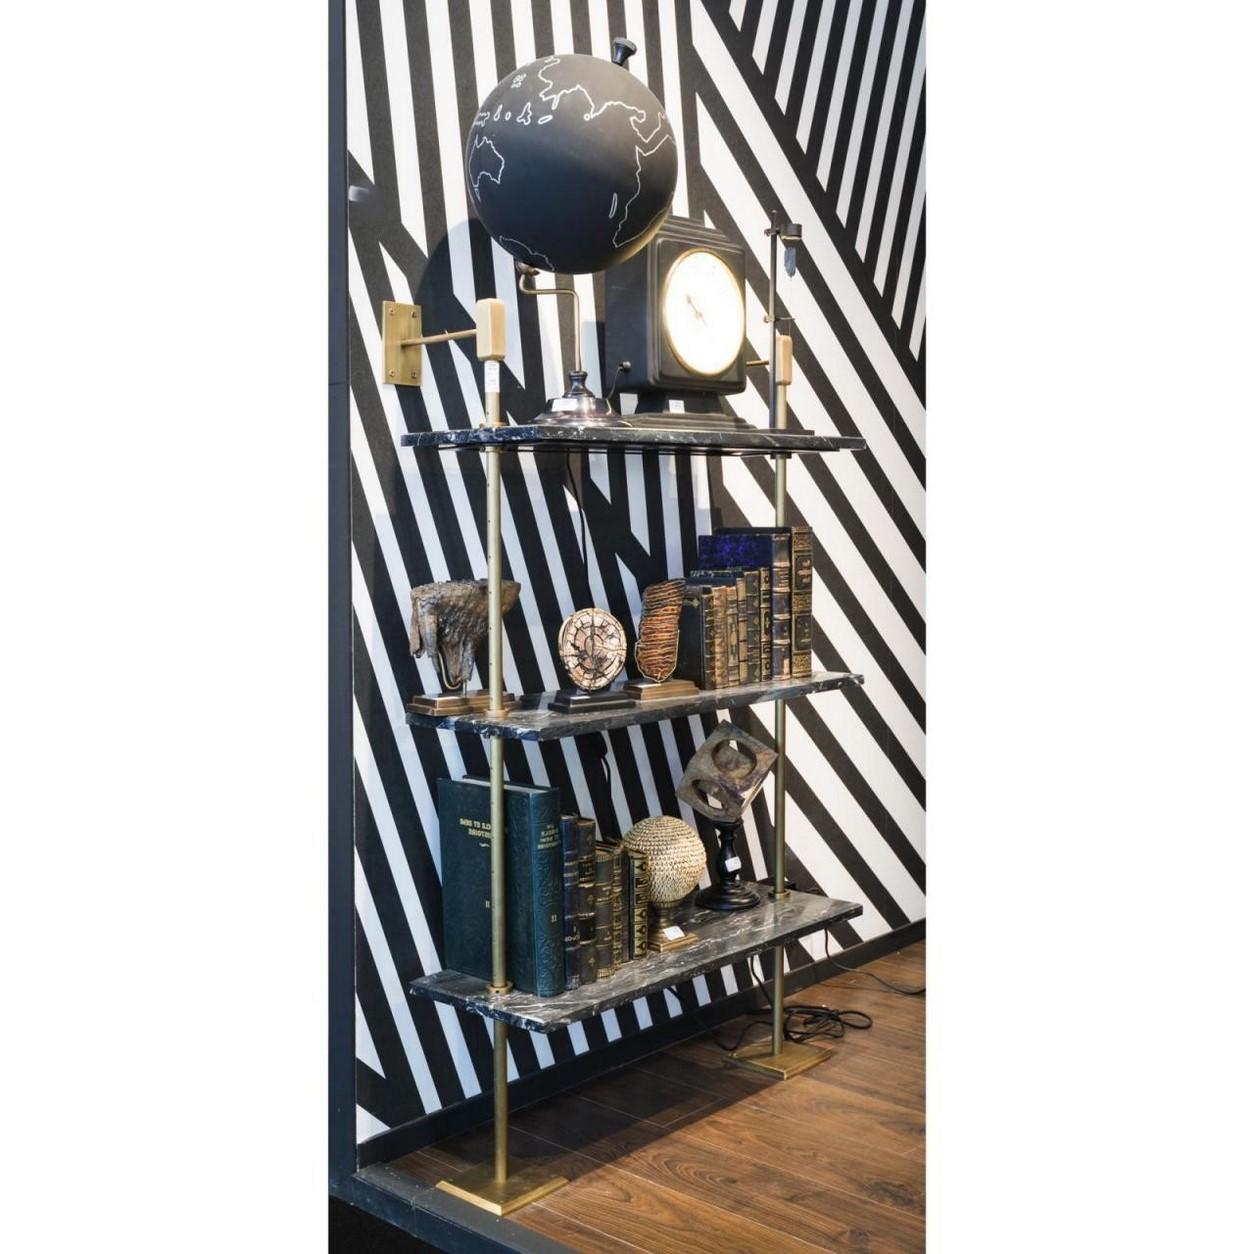 Modular wall unit system in brass and black marble storage shelves composed of 3 black and white marble shelves, a wall-mounted and patina brass structure. Practical, modular and design!